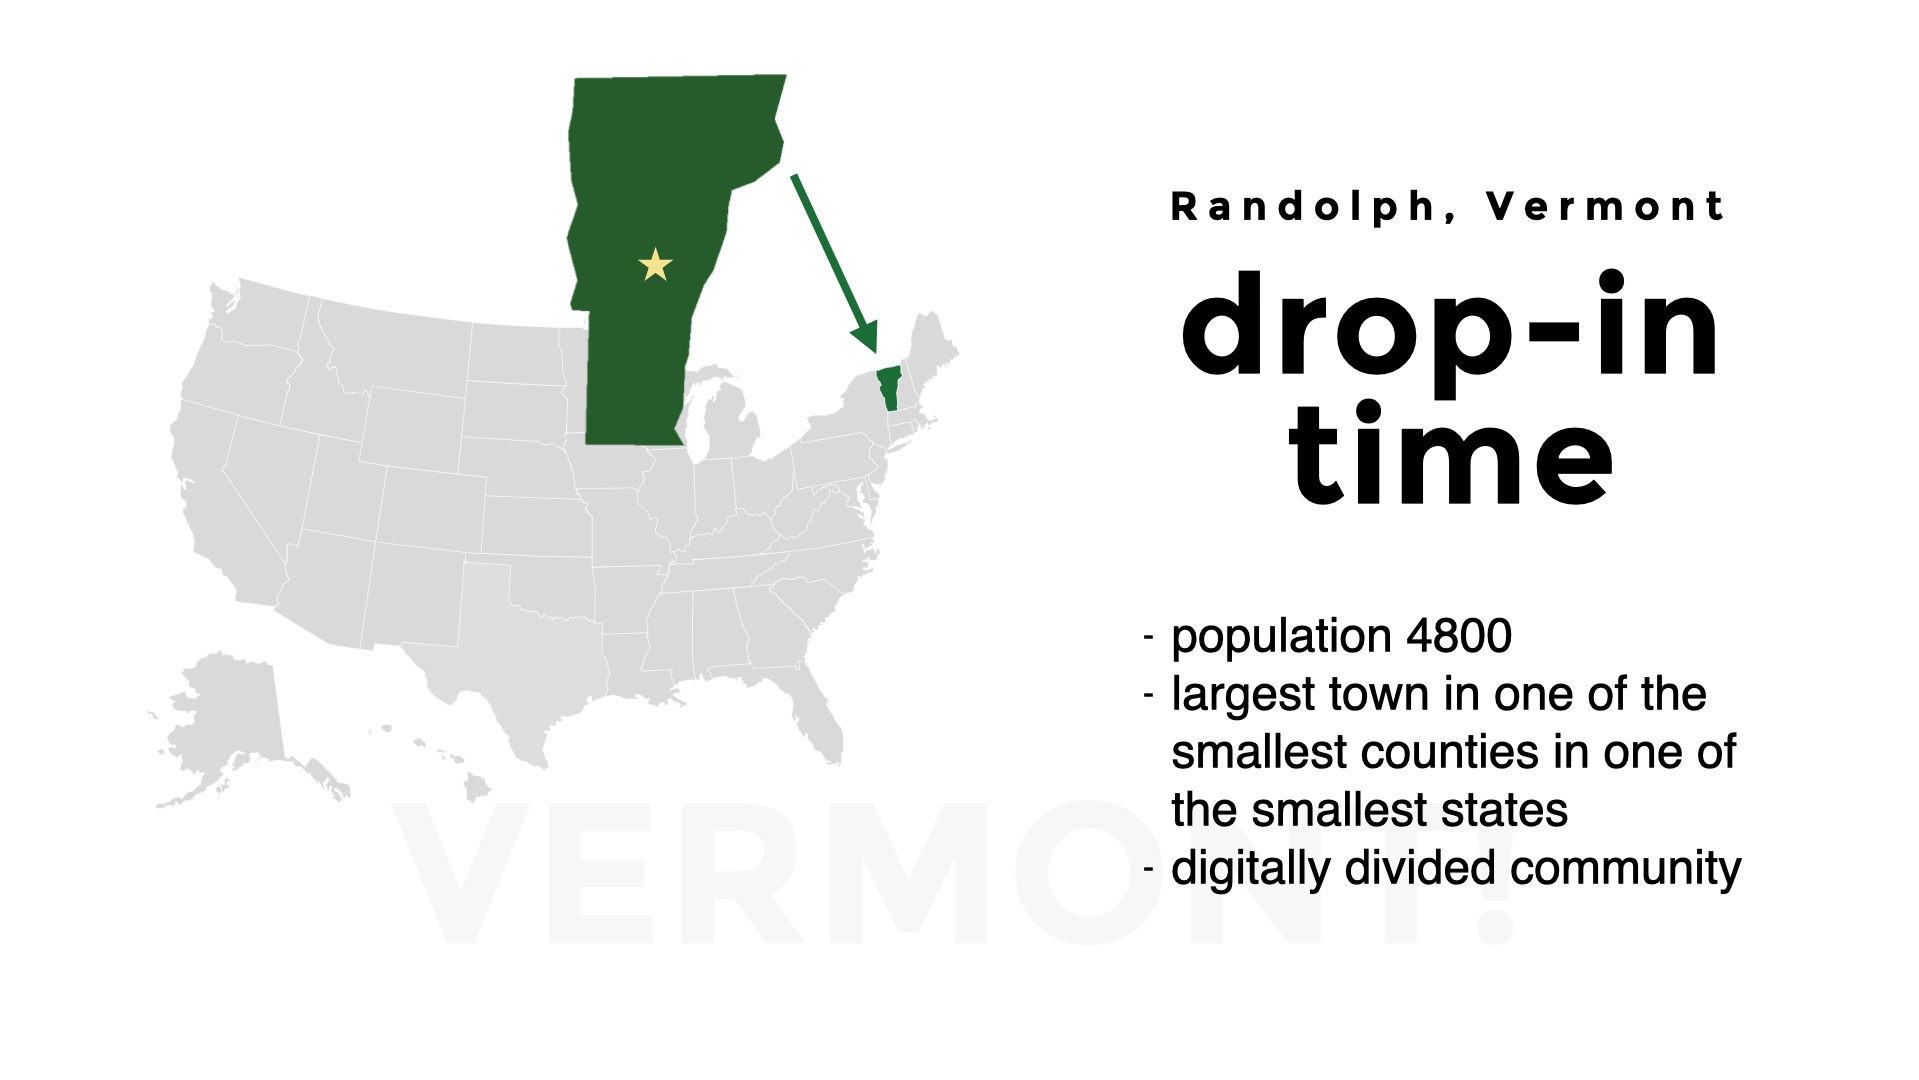 Image of Vermont pulled out from larger map of US. text: Randolph, Vermont, Drop-In Time. Bulleted list: - population 4800
- largest town in one of the smallest counties in one of the smallest states
- digitally divided community